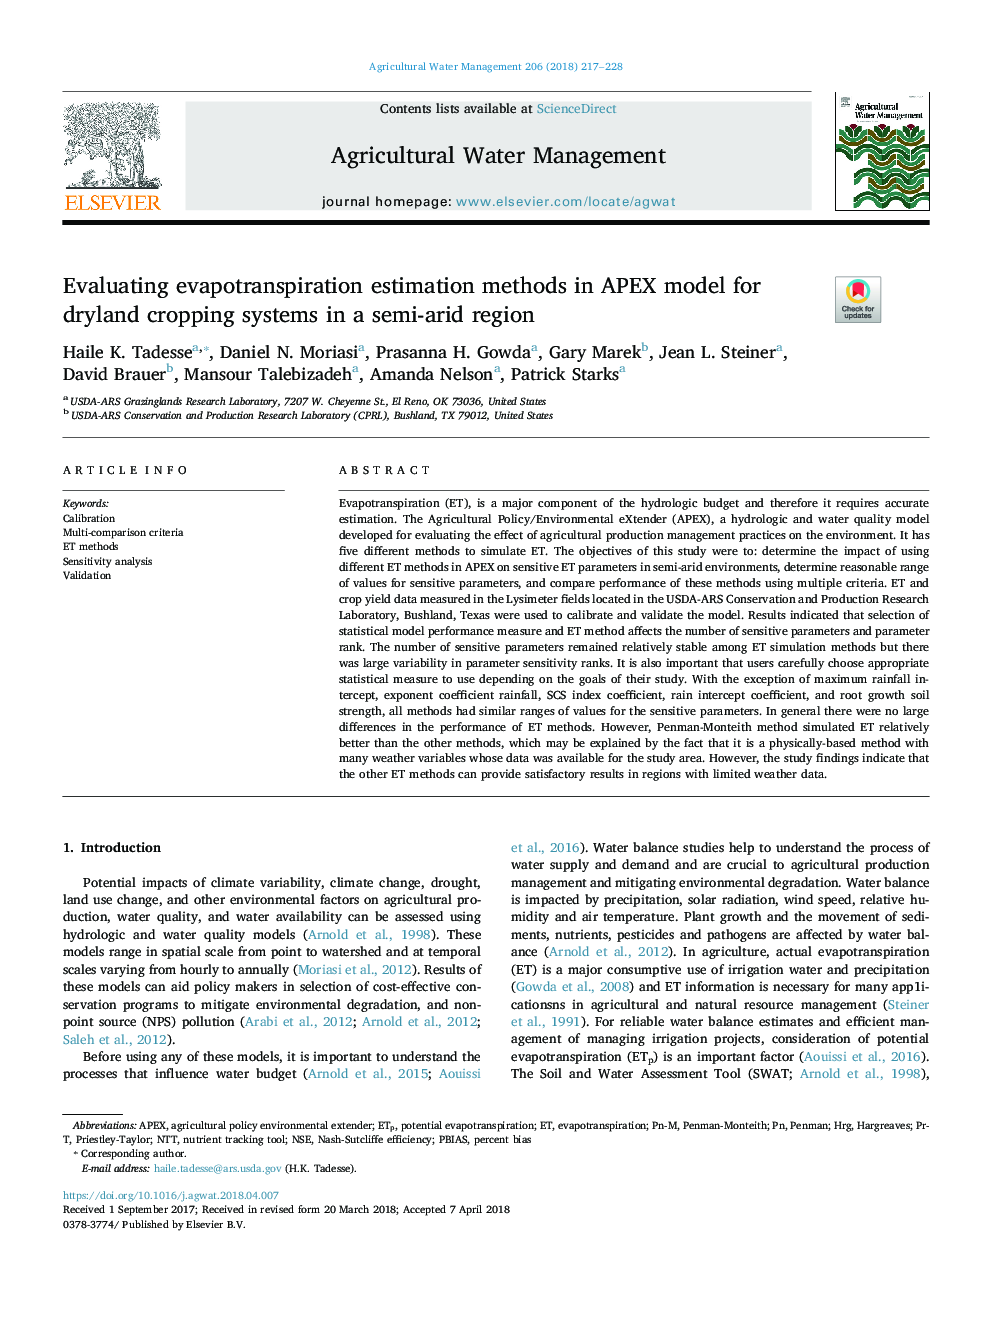 Evaluating evapotranspiration estimation methods in APEX model for dryland cropping systems in a semi-arid region